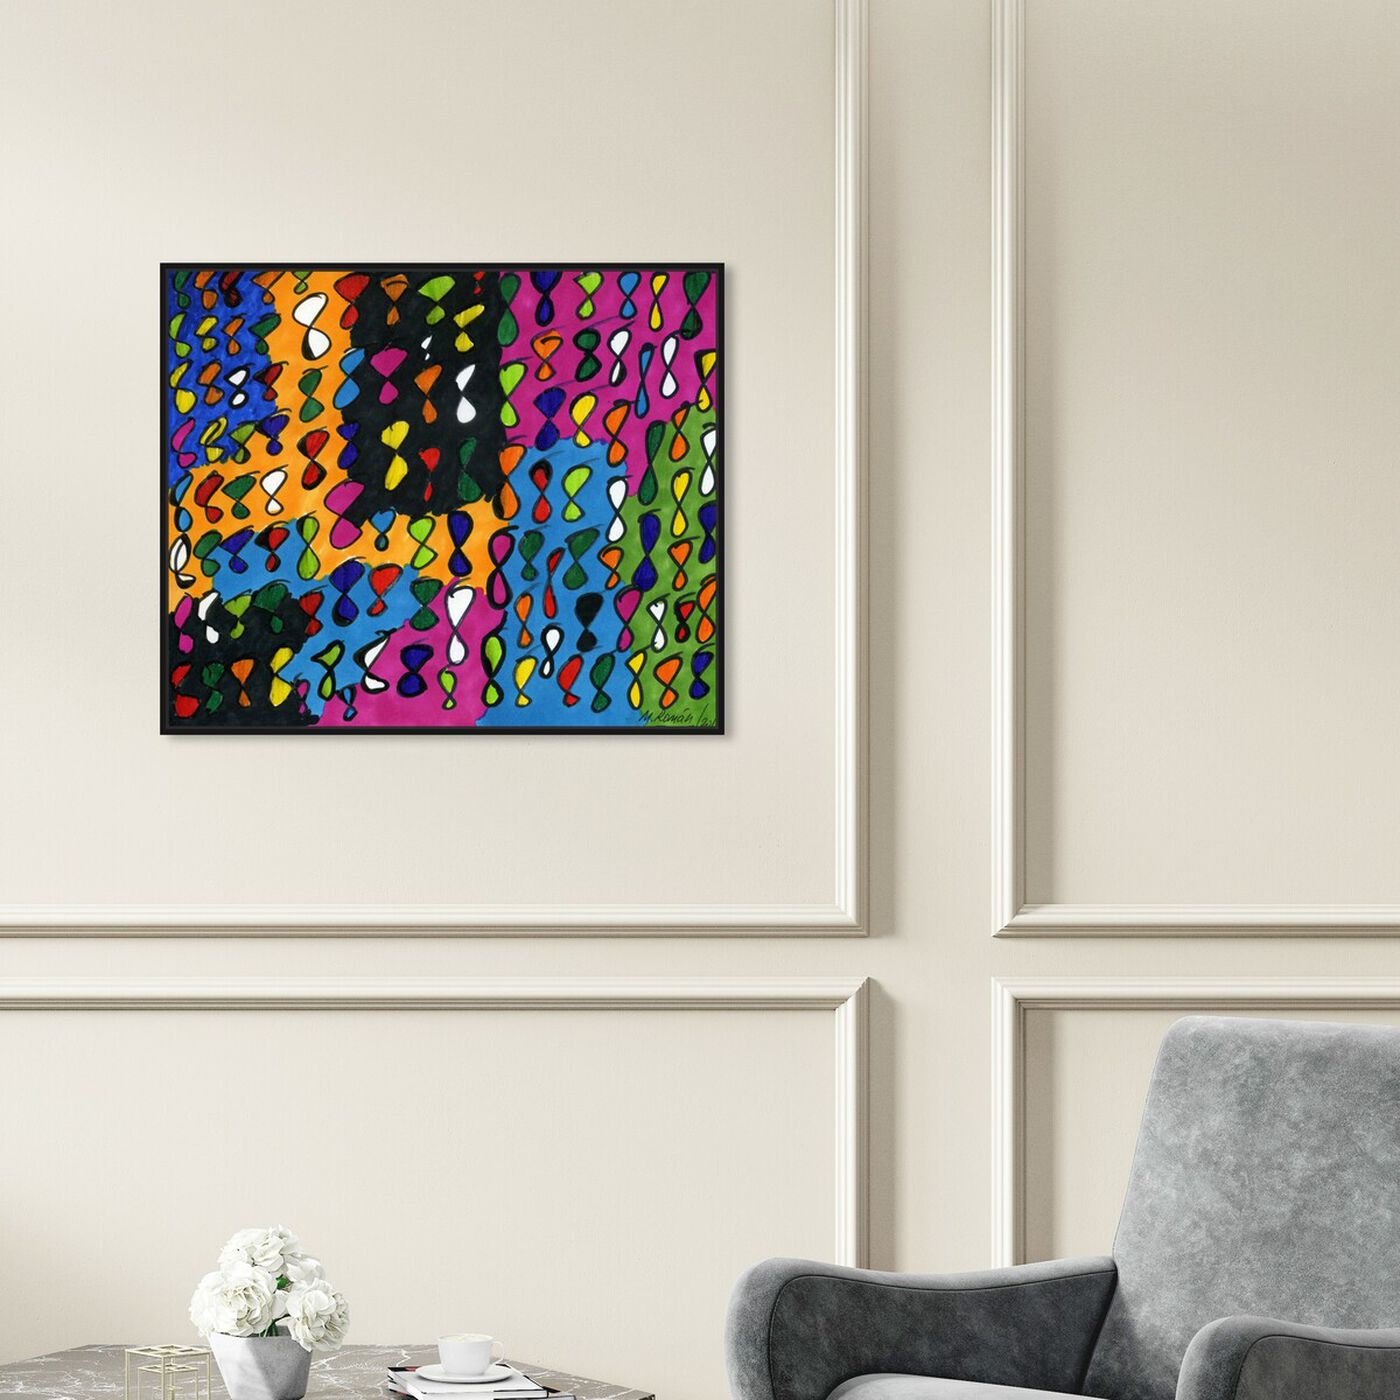 Hanging view of Infinite featuring abstract and shapes art.